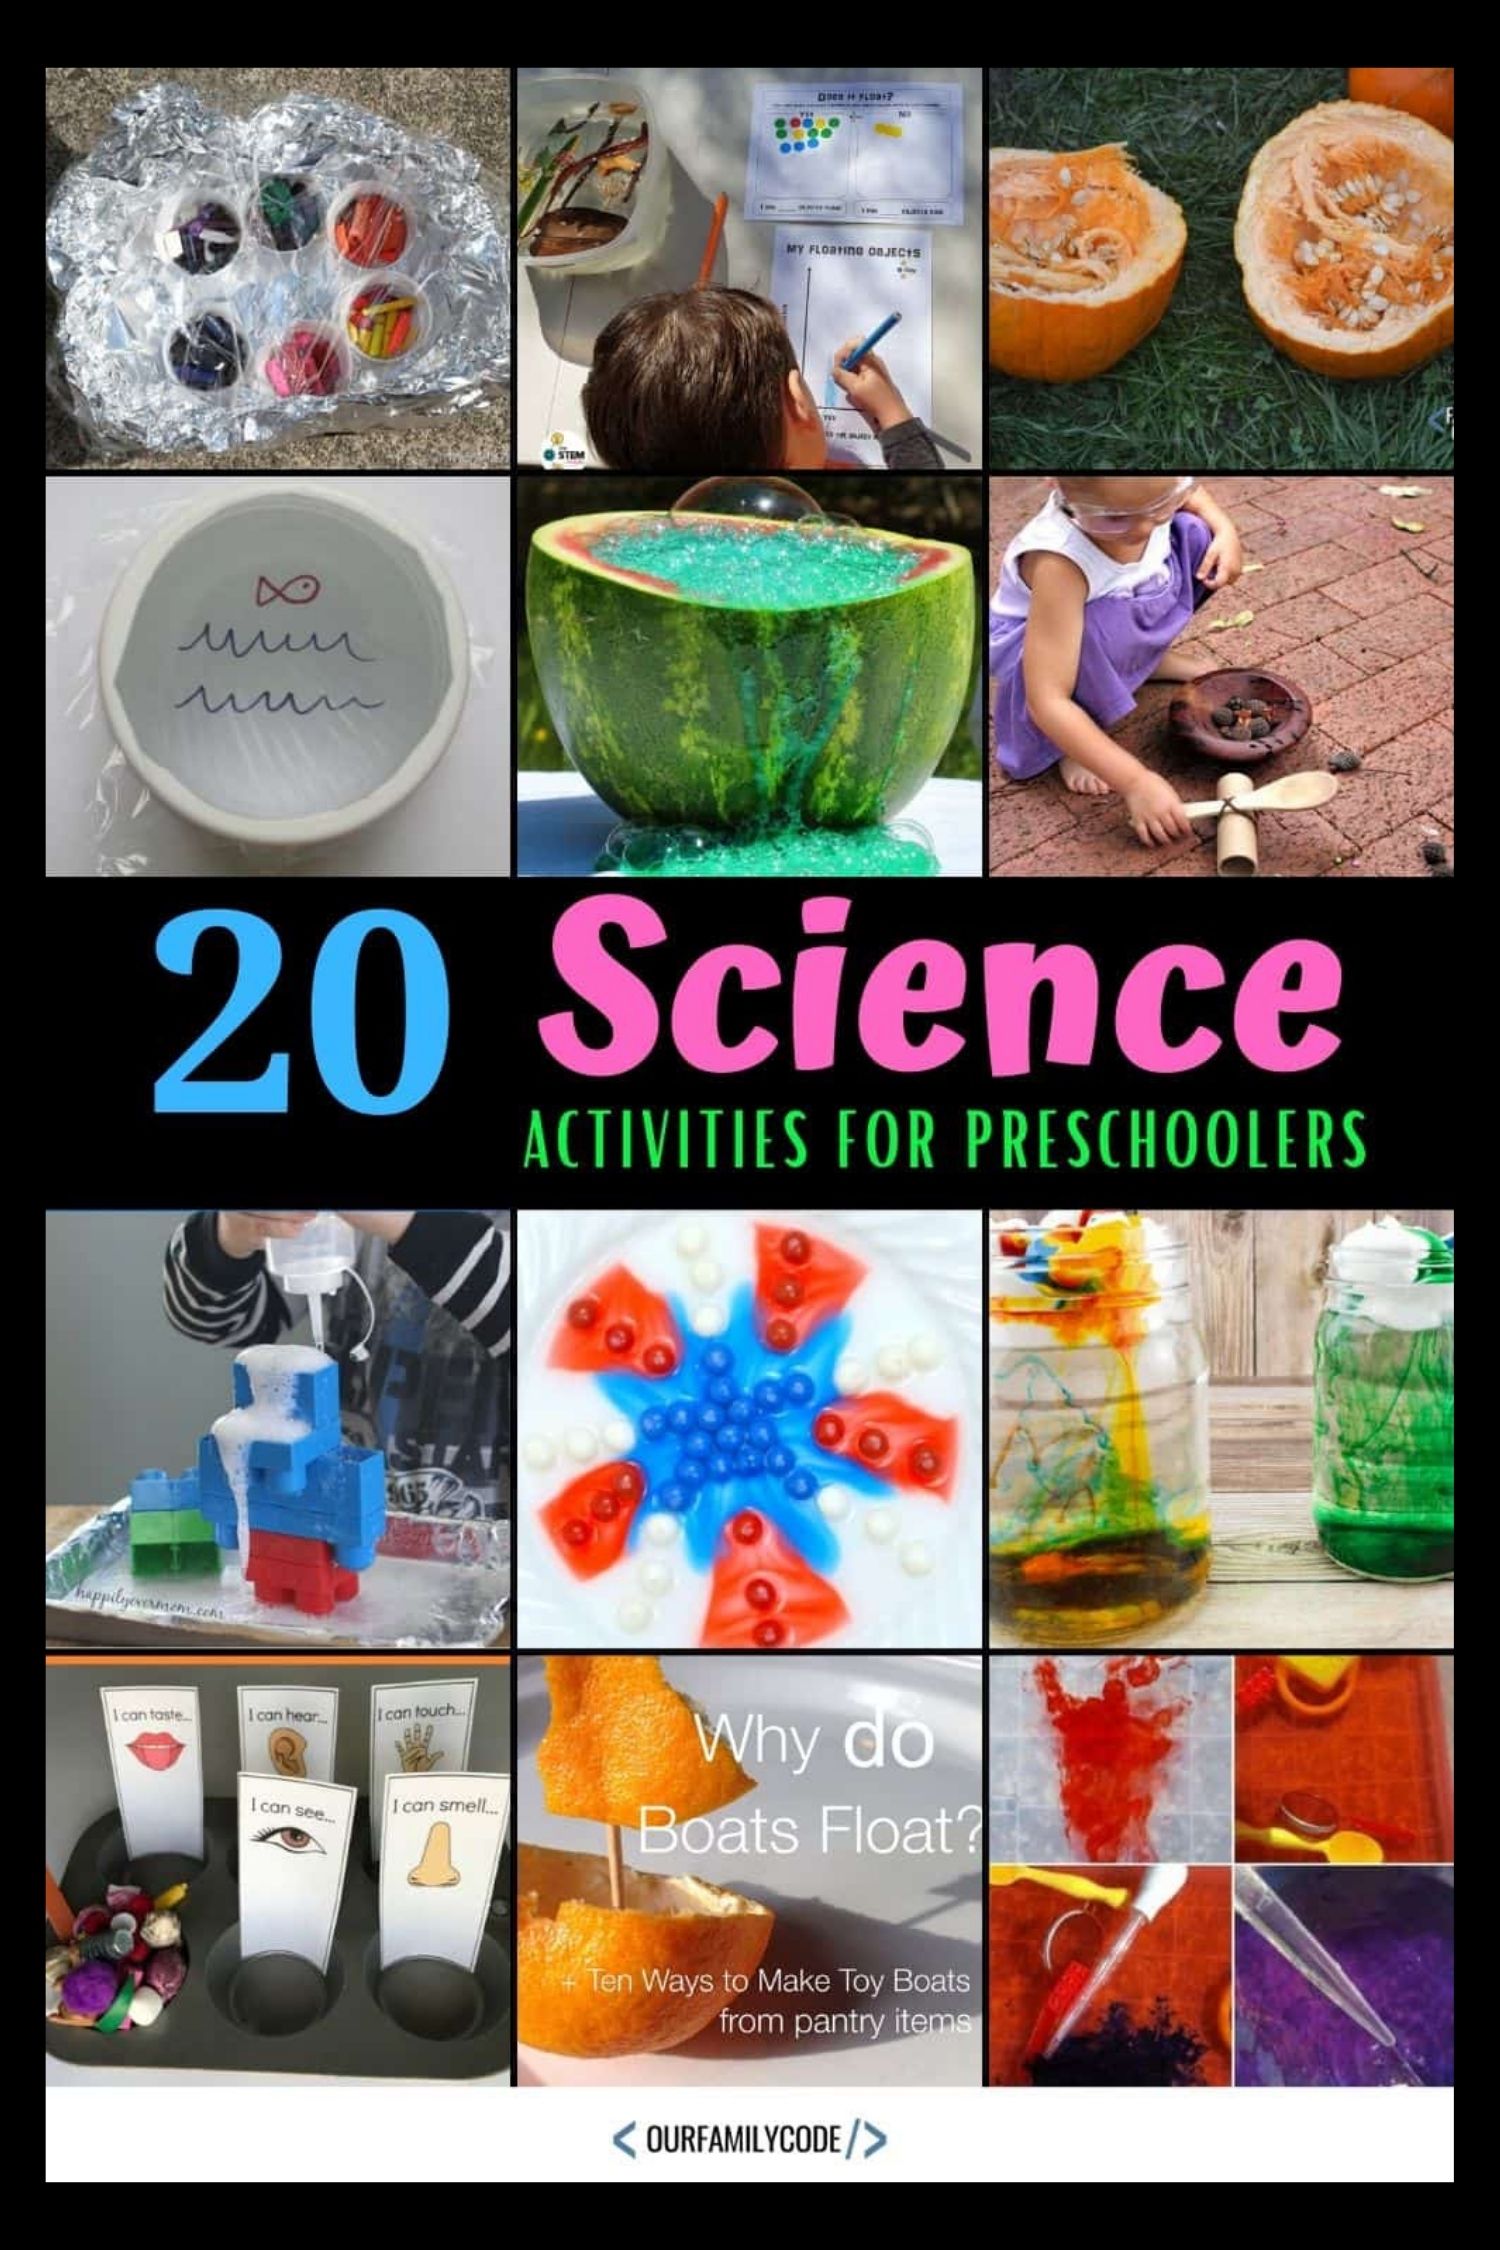 A picture of 20 science activities for preschoolers in a collage.